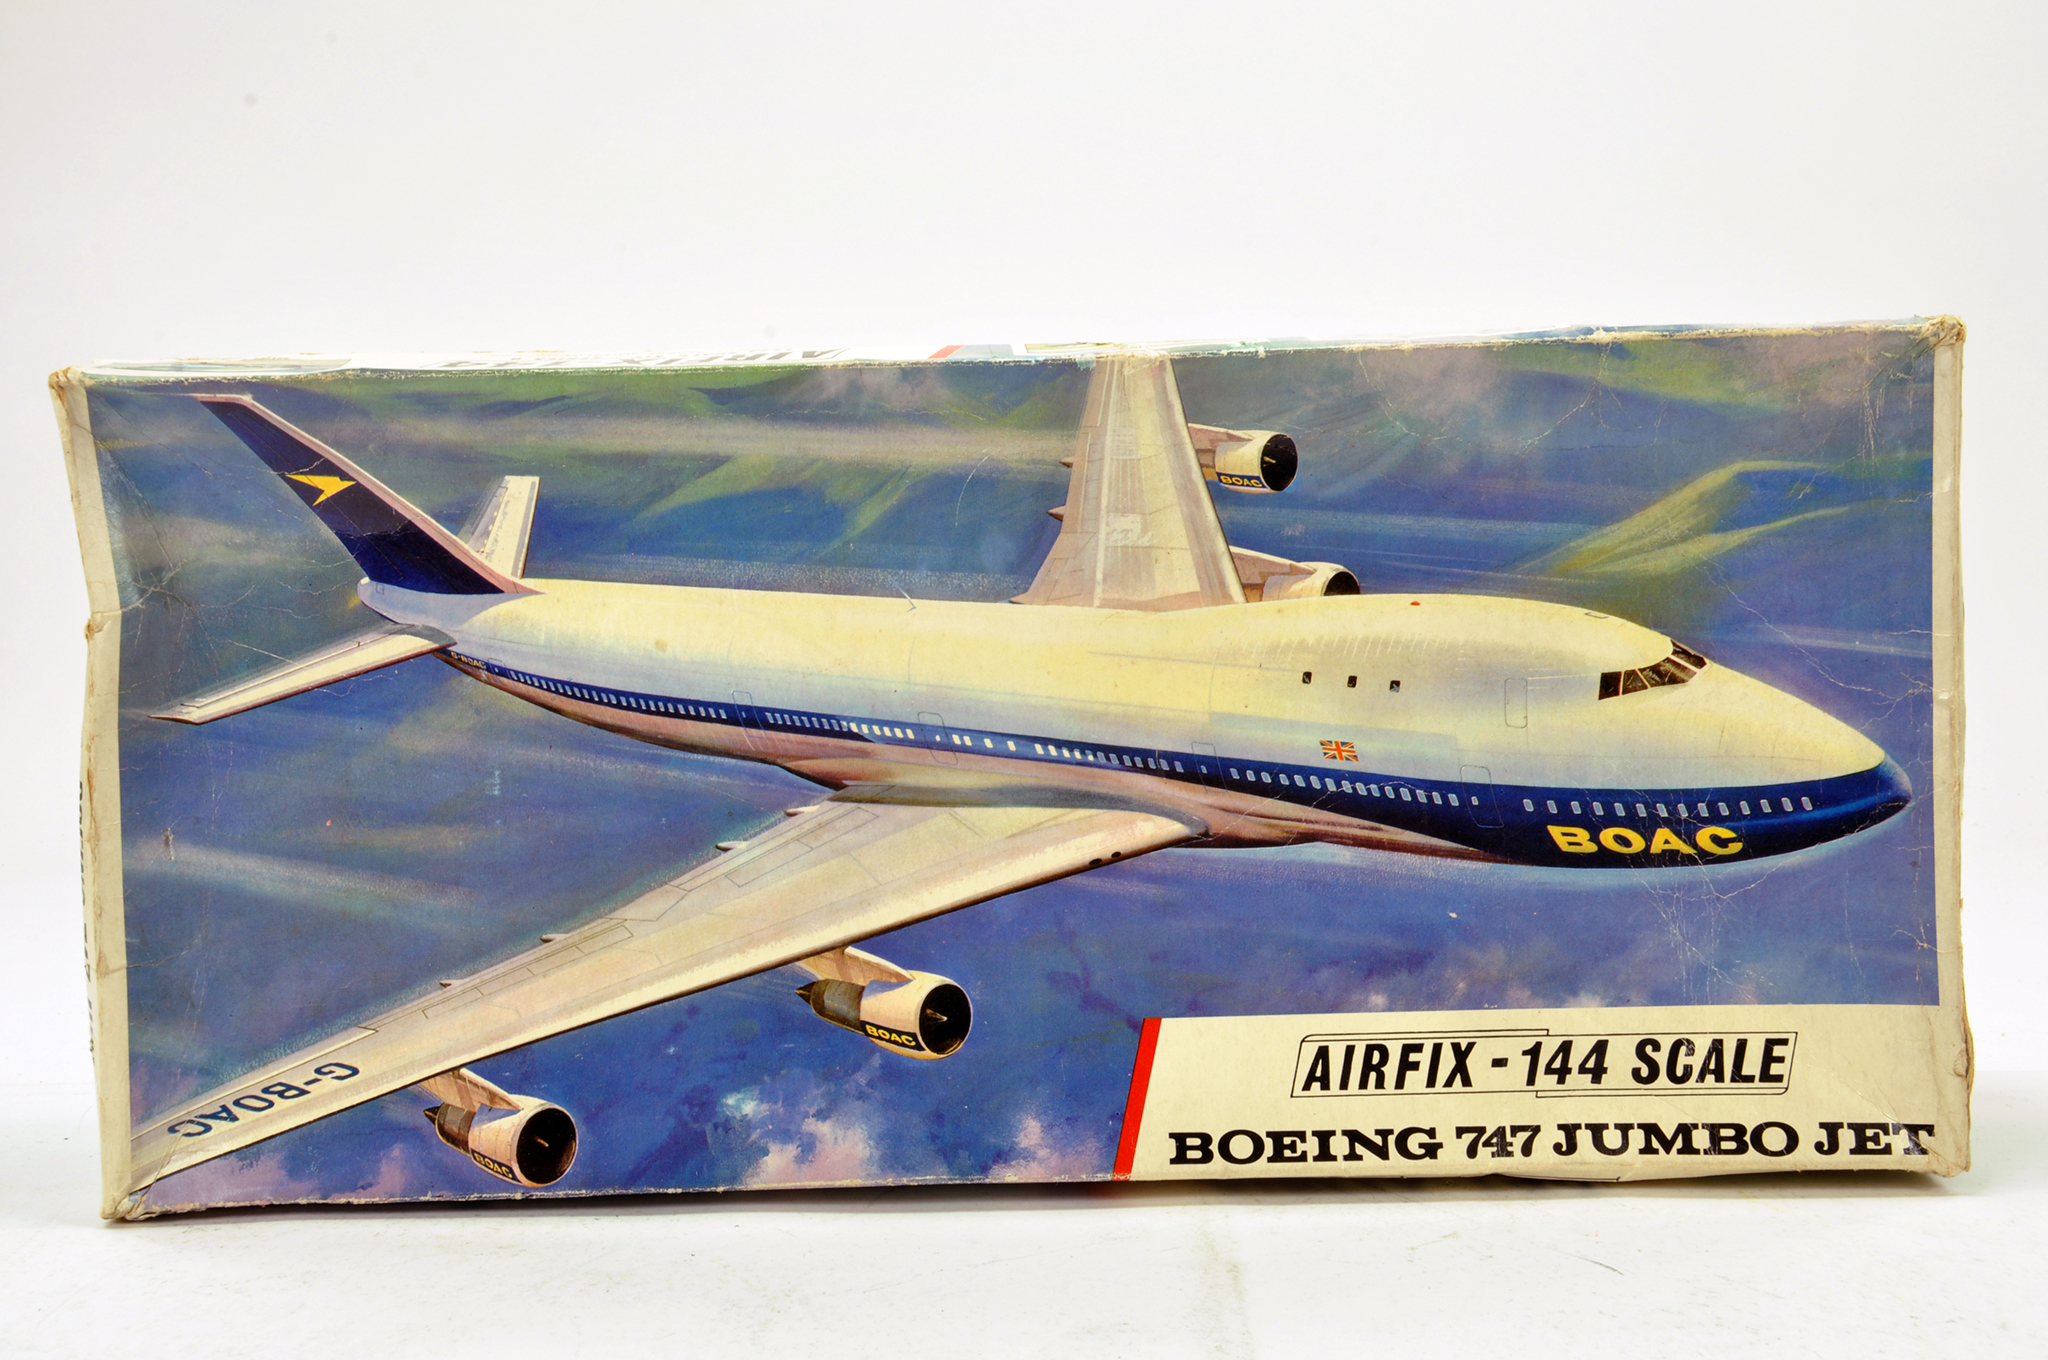 Airfix 1/144 Plastic Model Kit comprising Boeing 747 Airliner. Appears Complete.